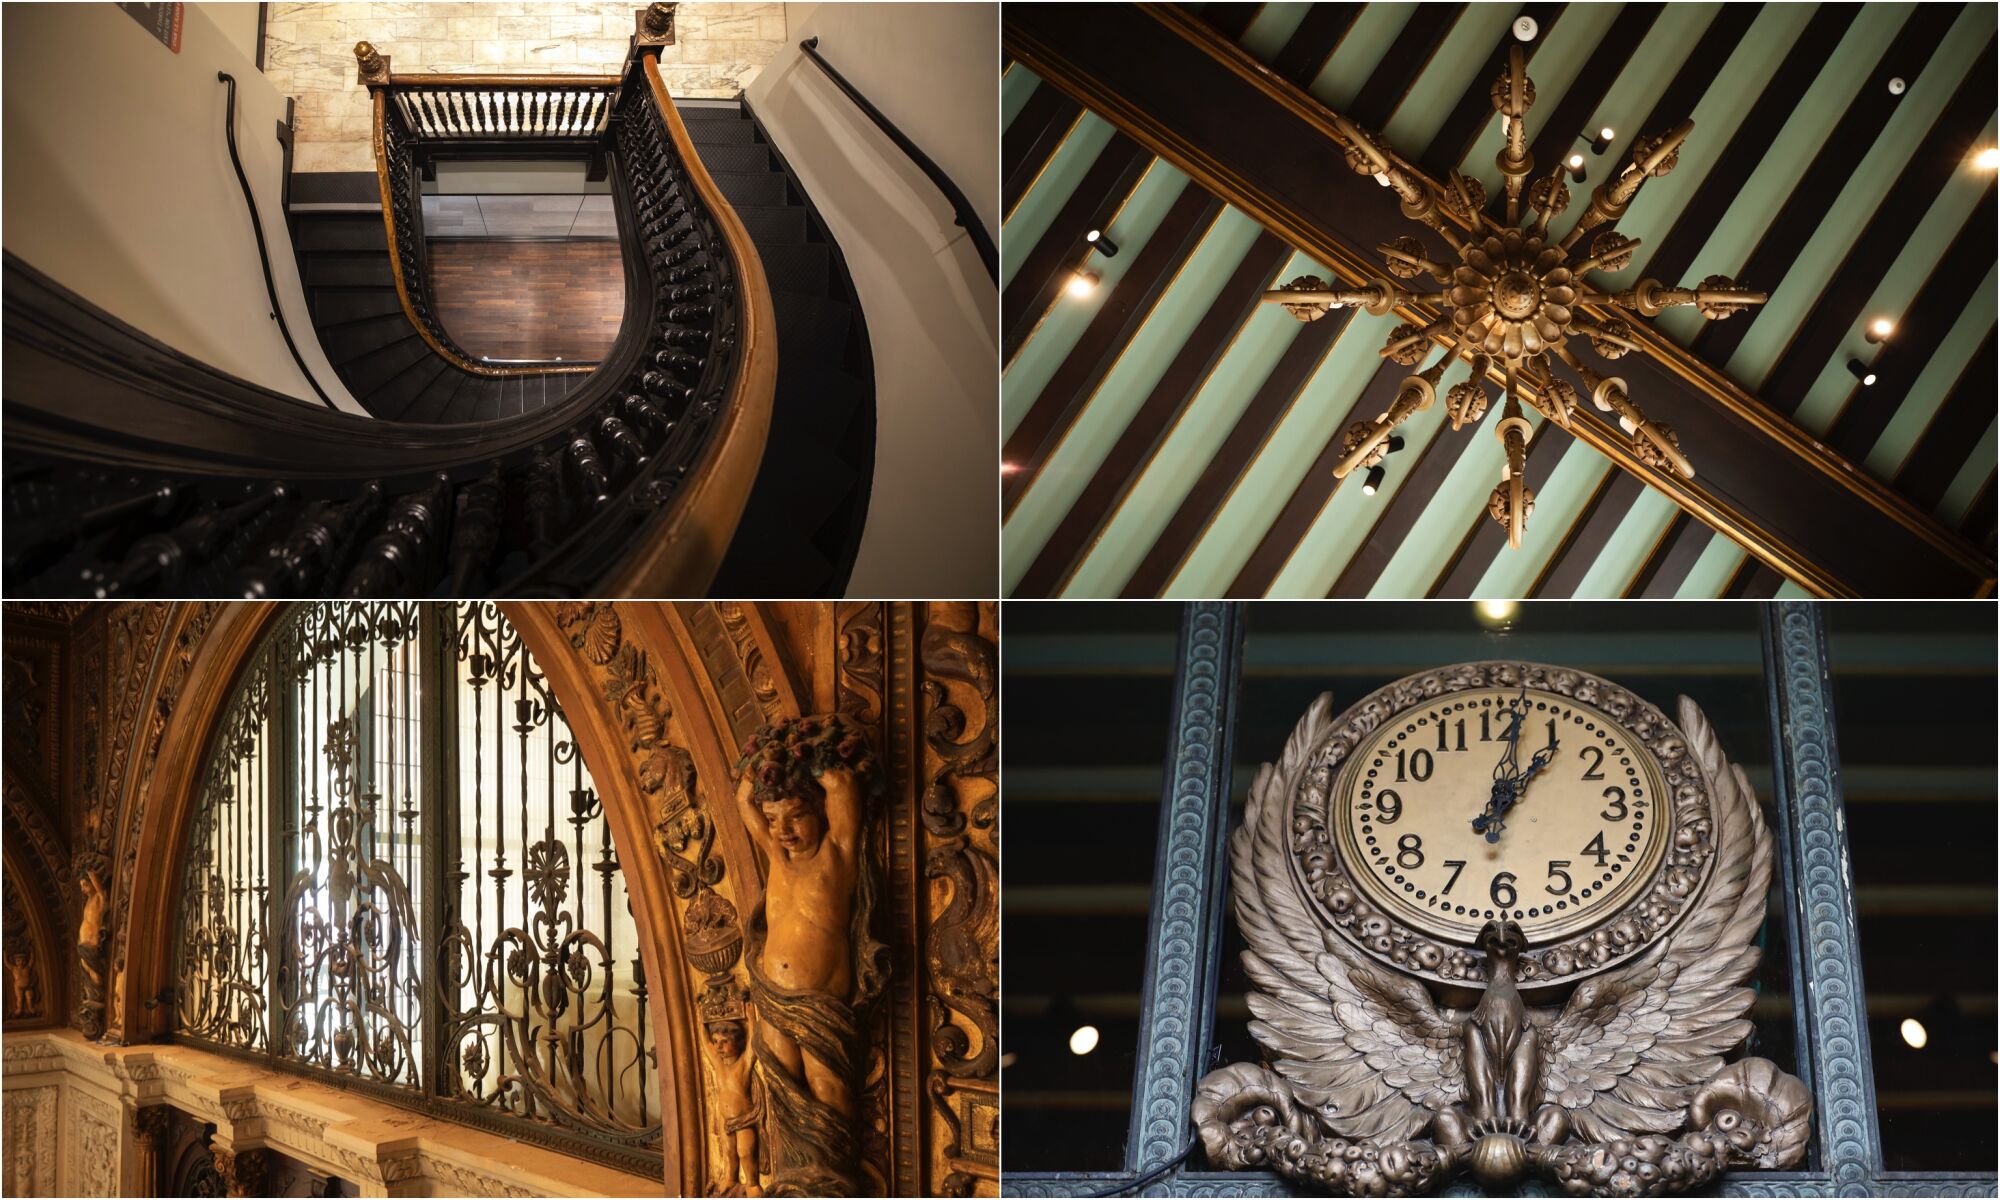 Four images showing the Herald Examiner Building's features